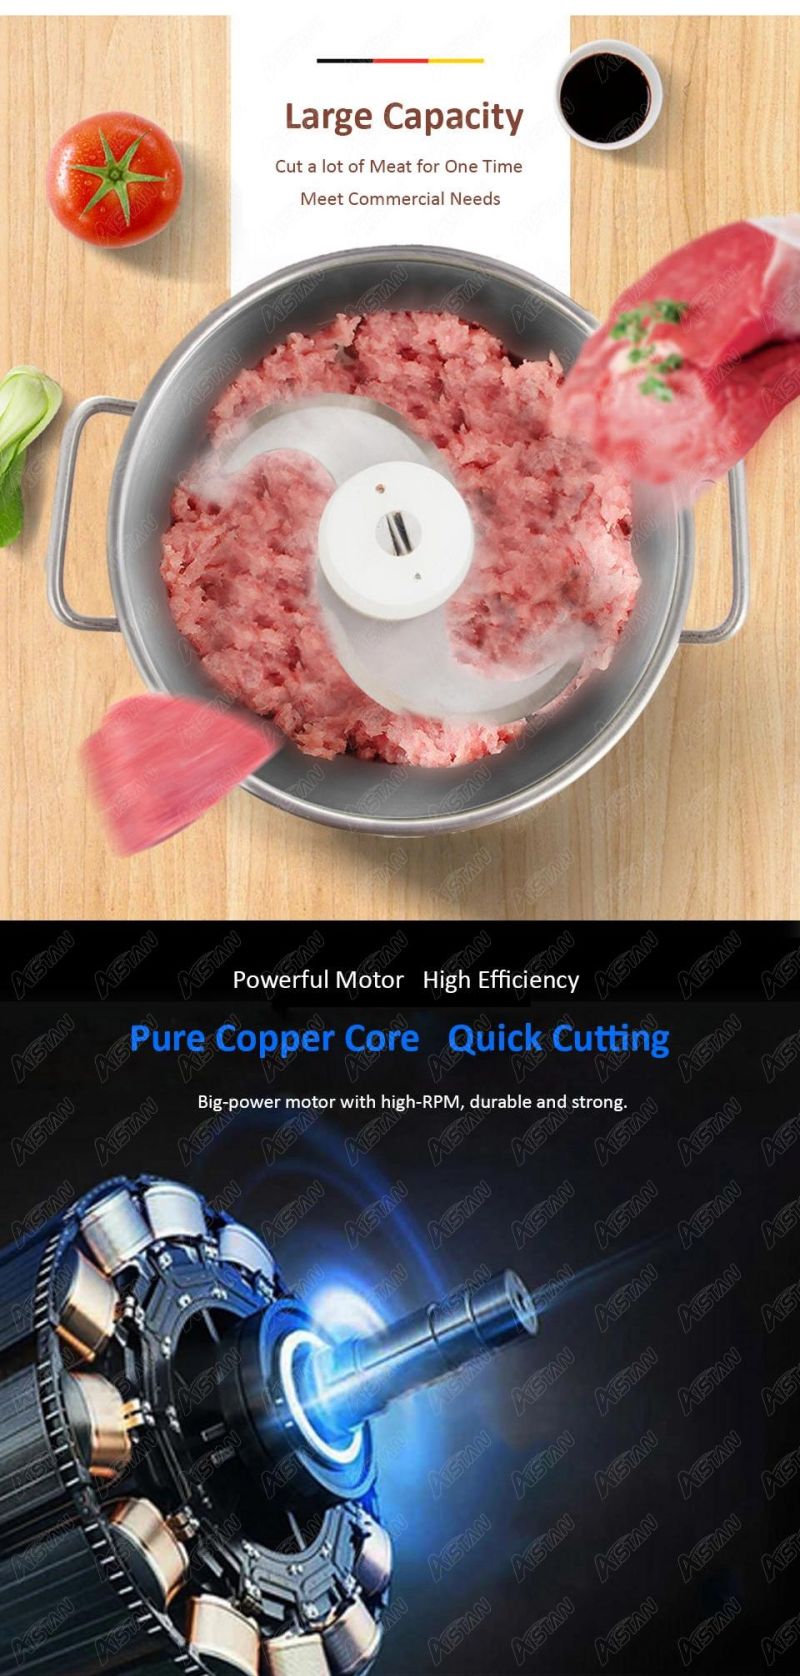 Hr9 Electric Stainless Steel Professional Food Cutter Machine Leafy Industrial Vegetable Slicer Cutter Multifunction